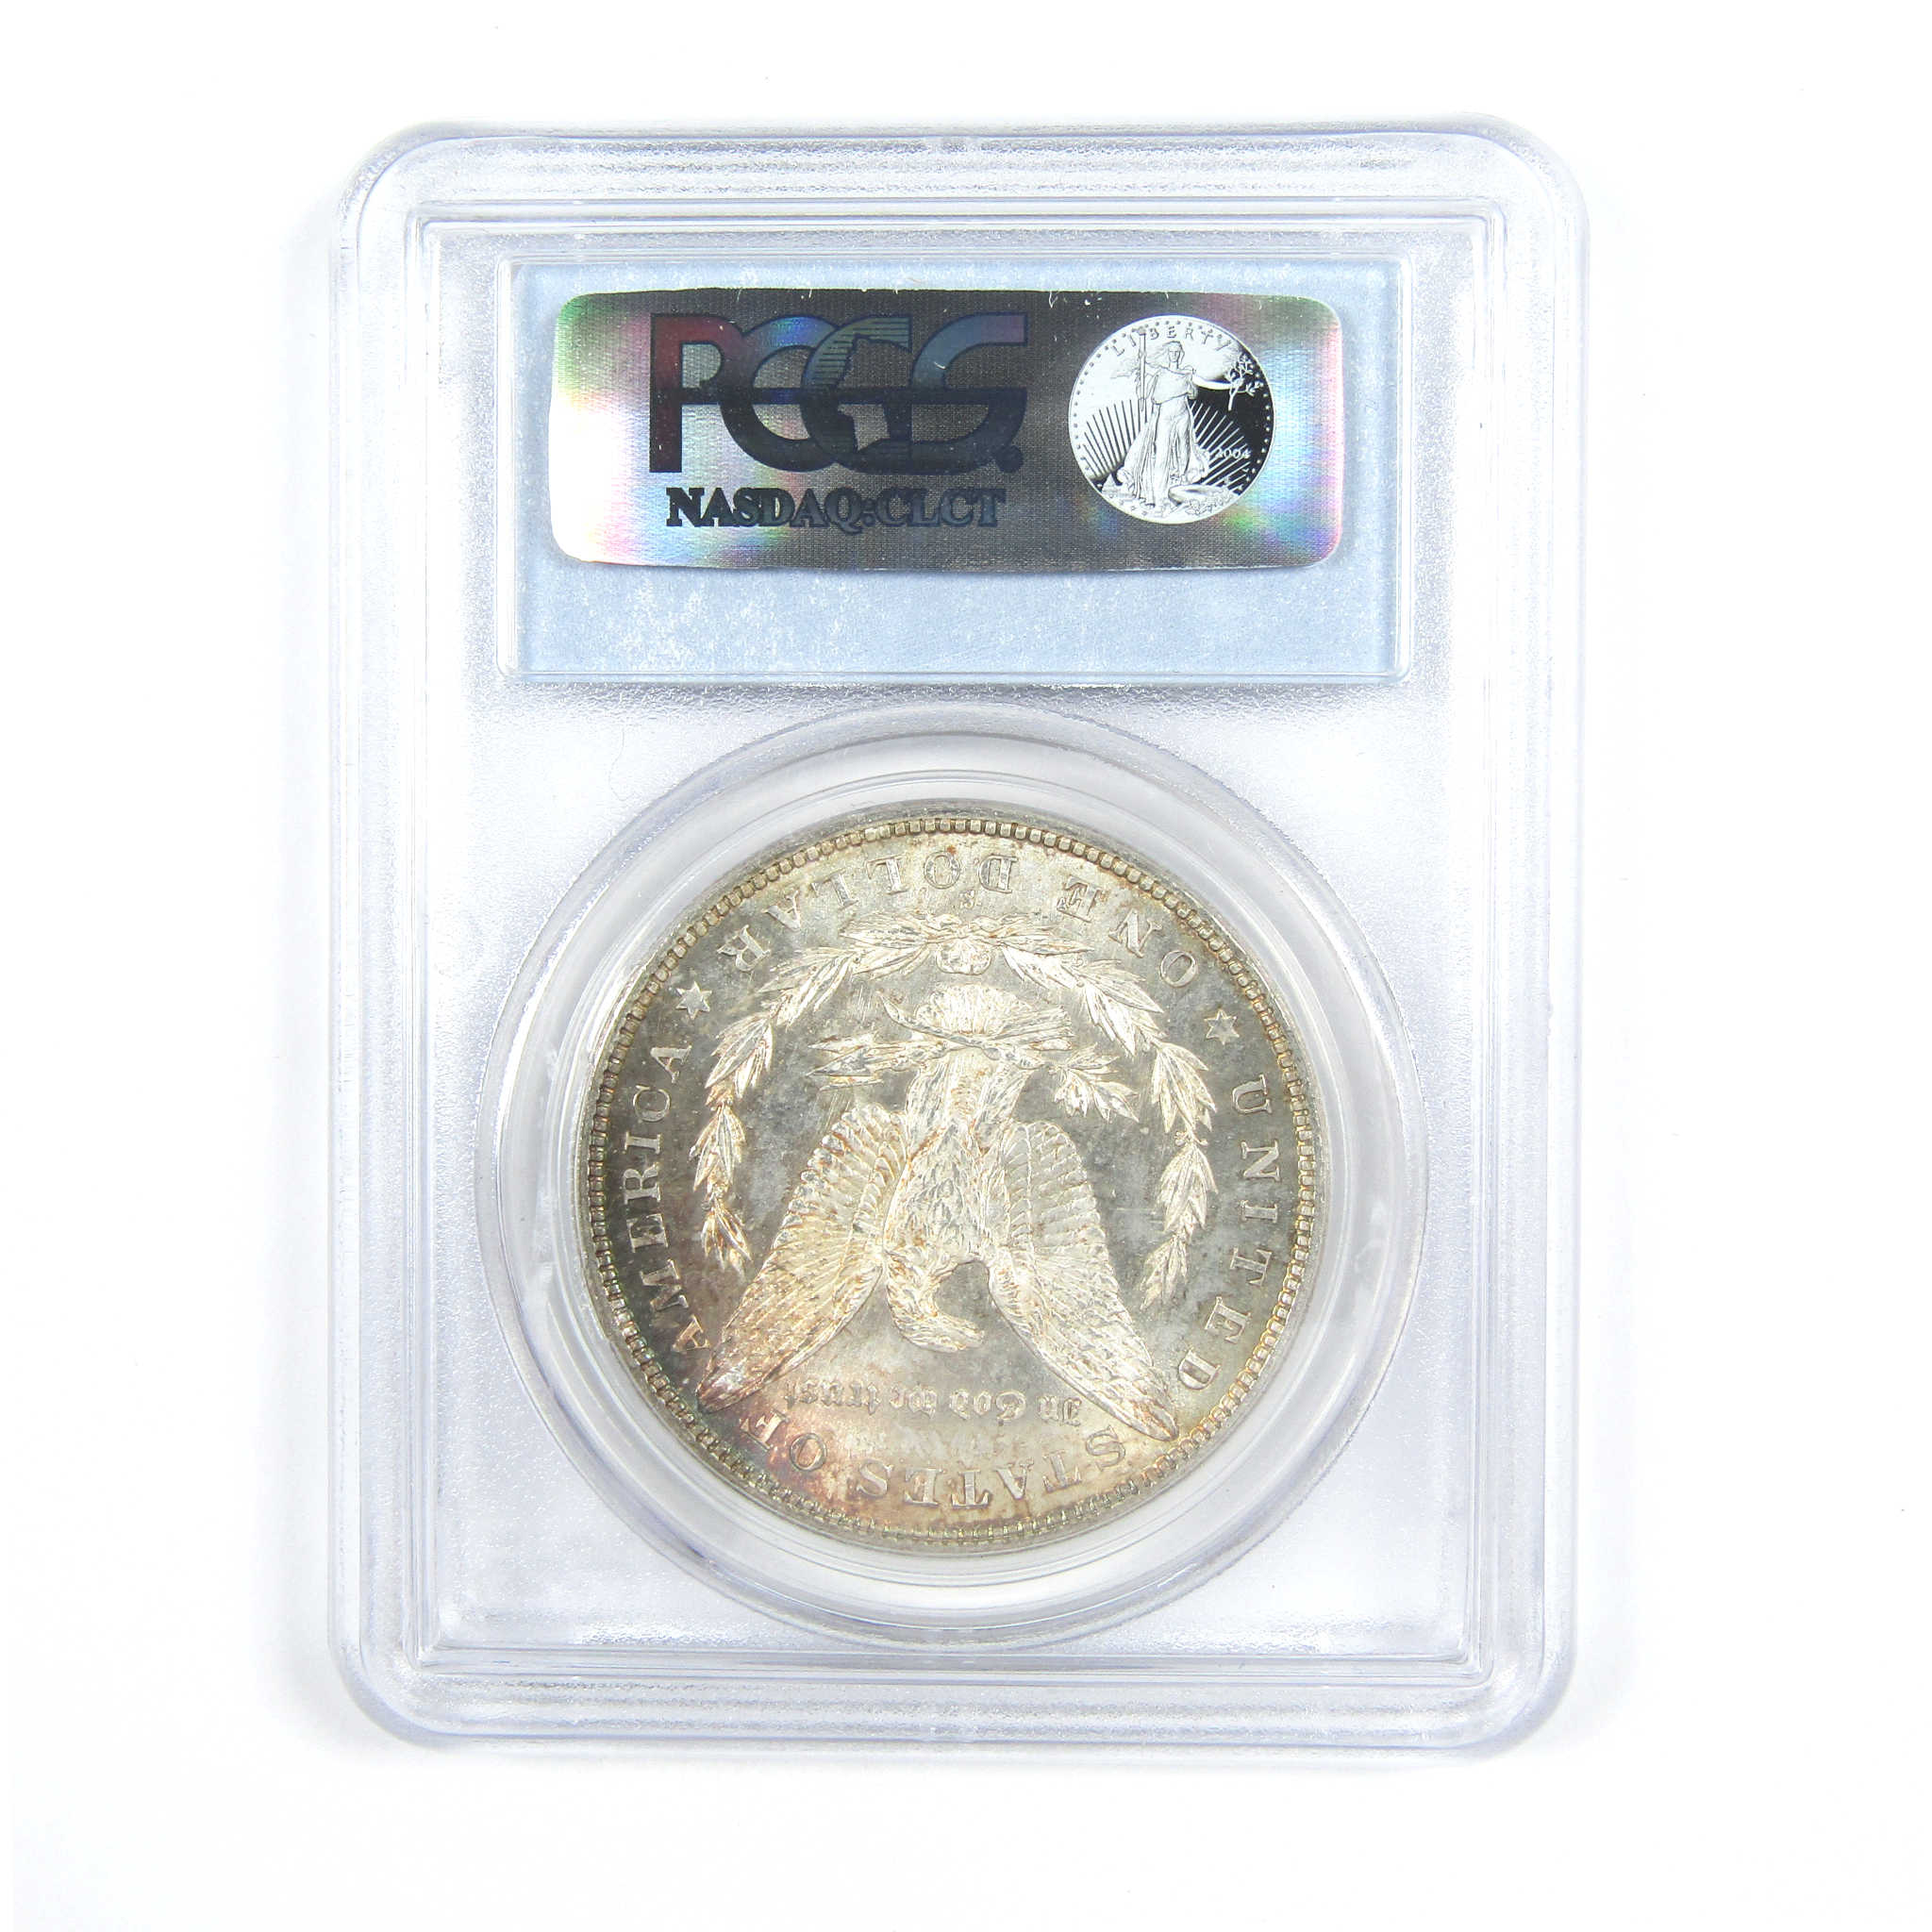 1880 S VAM-12 Checkmark Morgan Dollar MS 64 PCGS Silver $1 SKU:CPC7345 - Morgan coin - Morgan silver dollar - Morgan silver dollar for sale - Profile Coins &amp; Collectibles